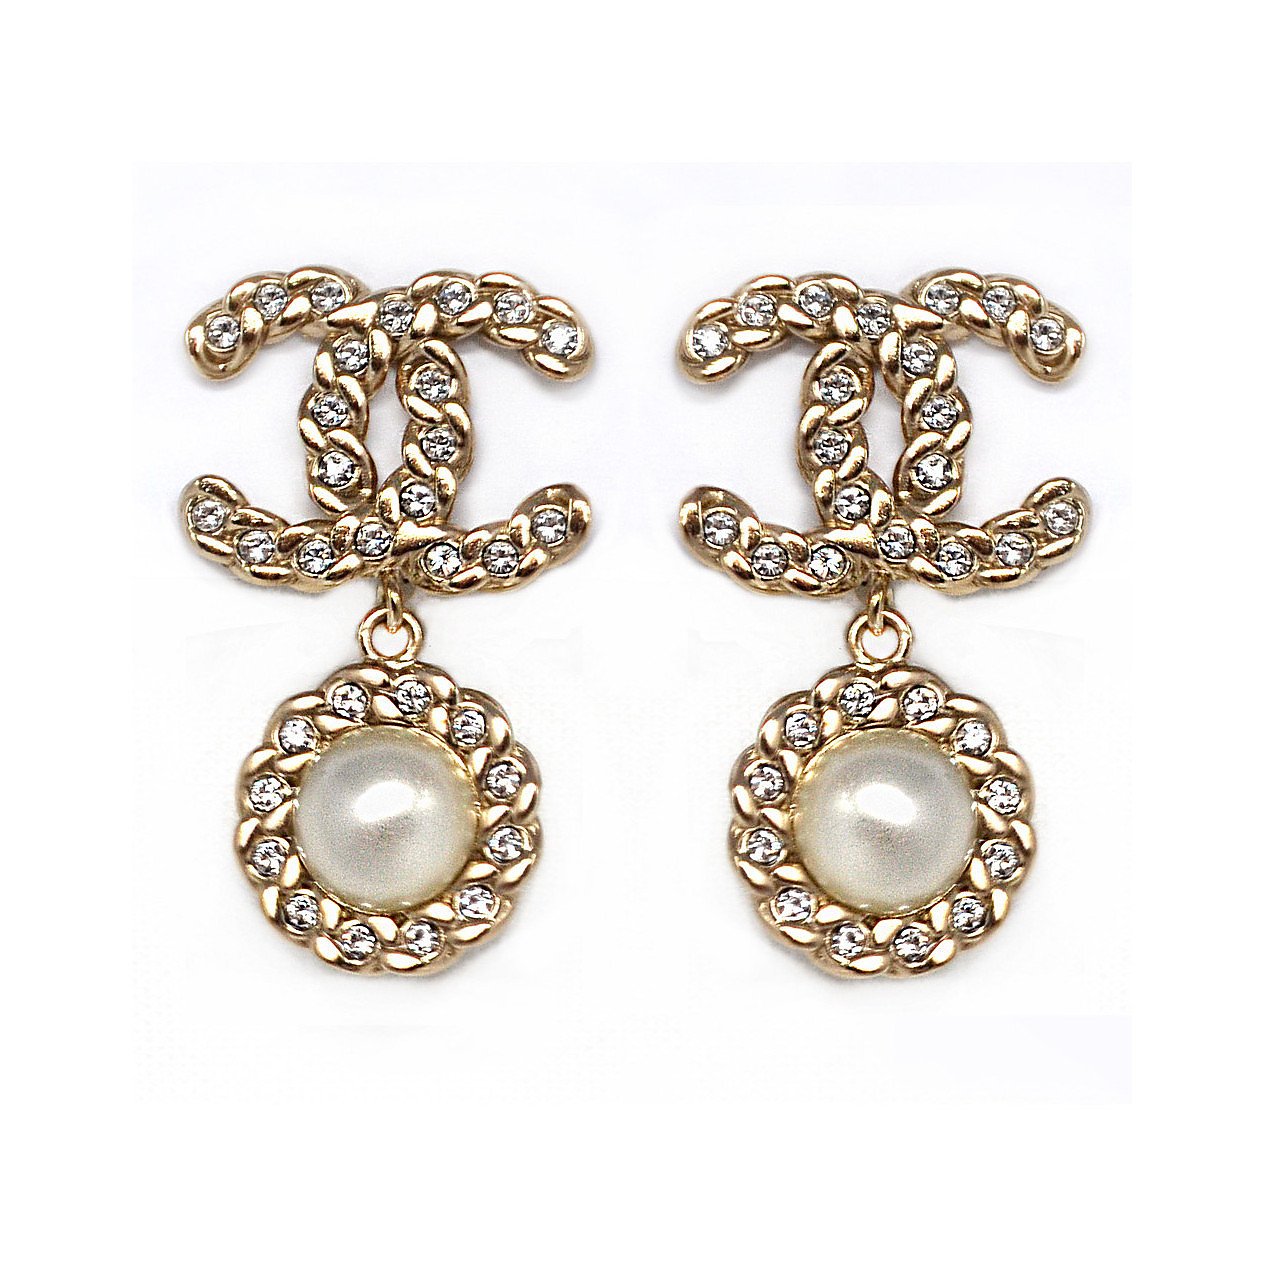 Authentic Chanel Pearl Drop Earrings  Brincos pequenos Pérolas chanel  Brincos chanel